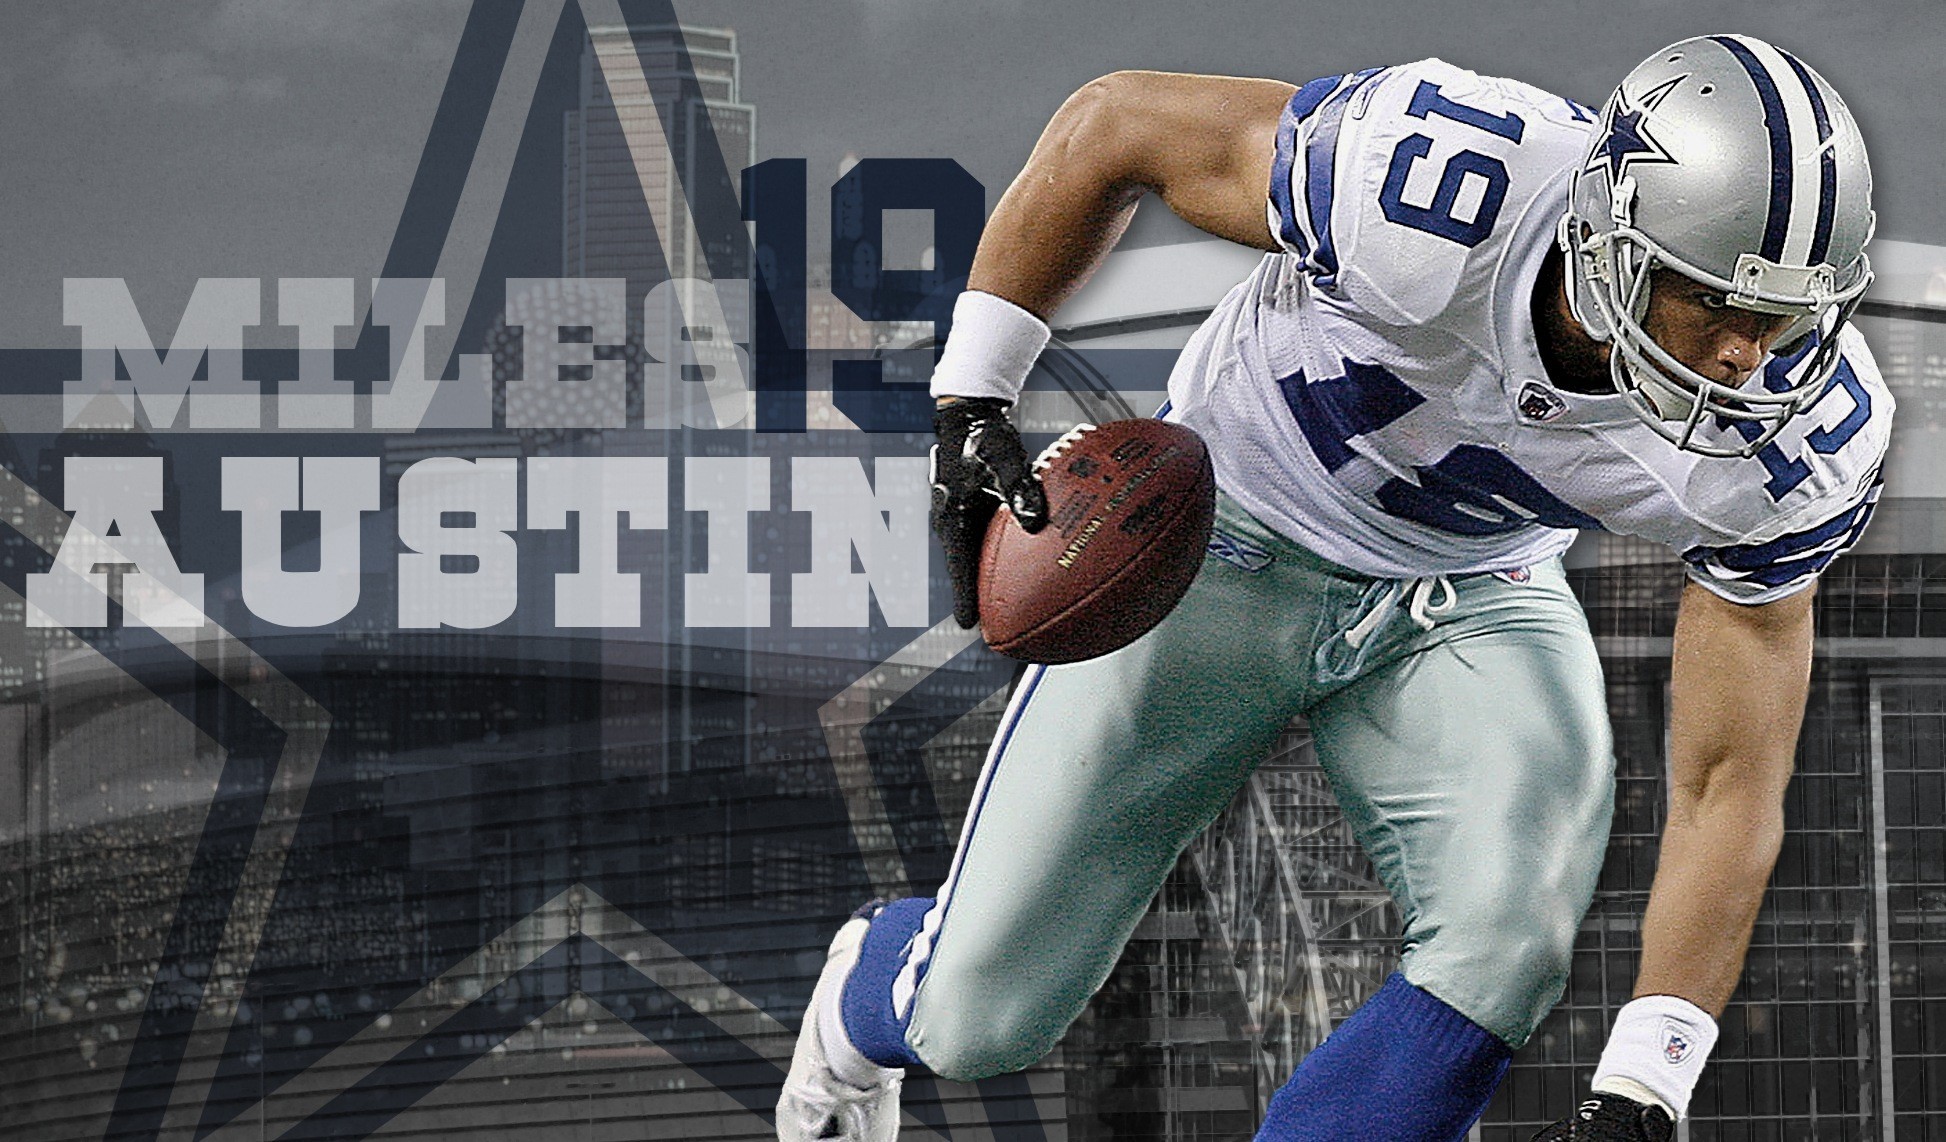 1946x1142 2500x1562 100% Quality HD Dallas Cowboys Pics 1963.91 Kb, Wallpapers and  Pictures – download for free